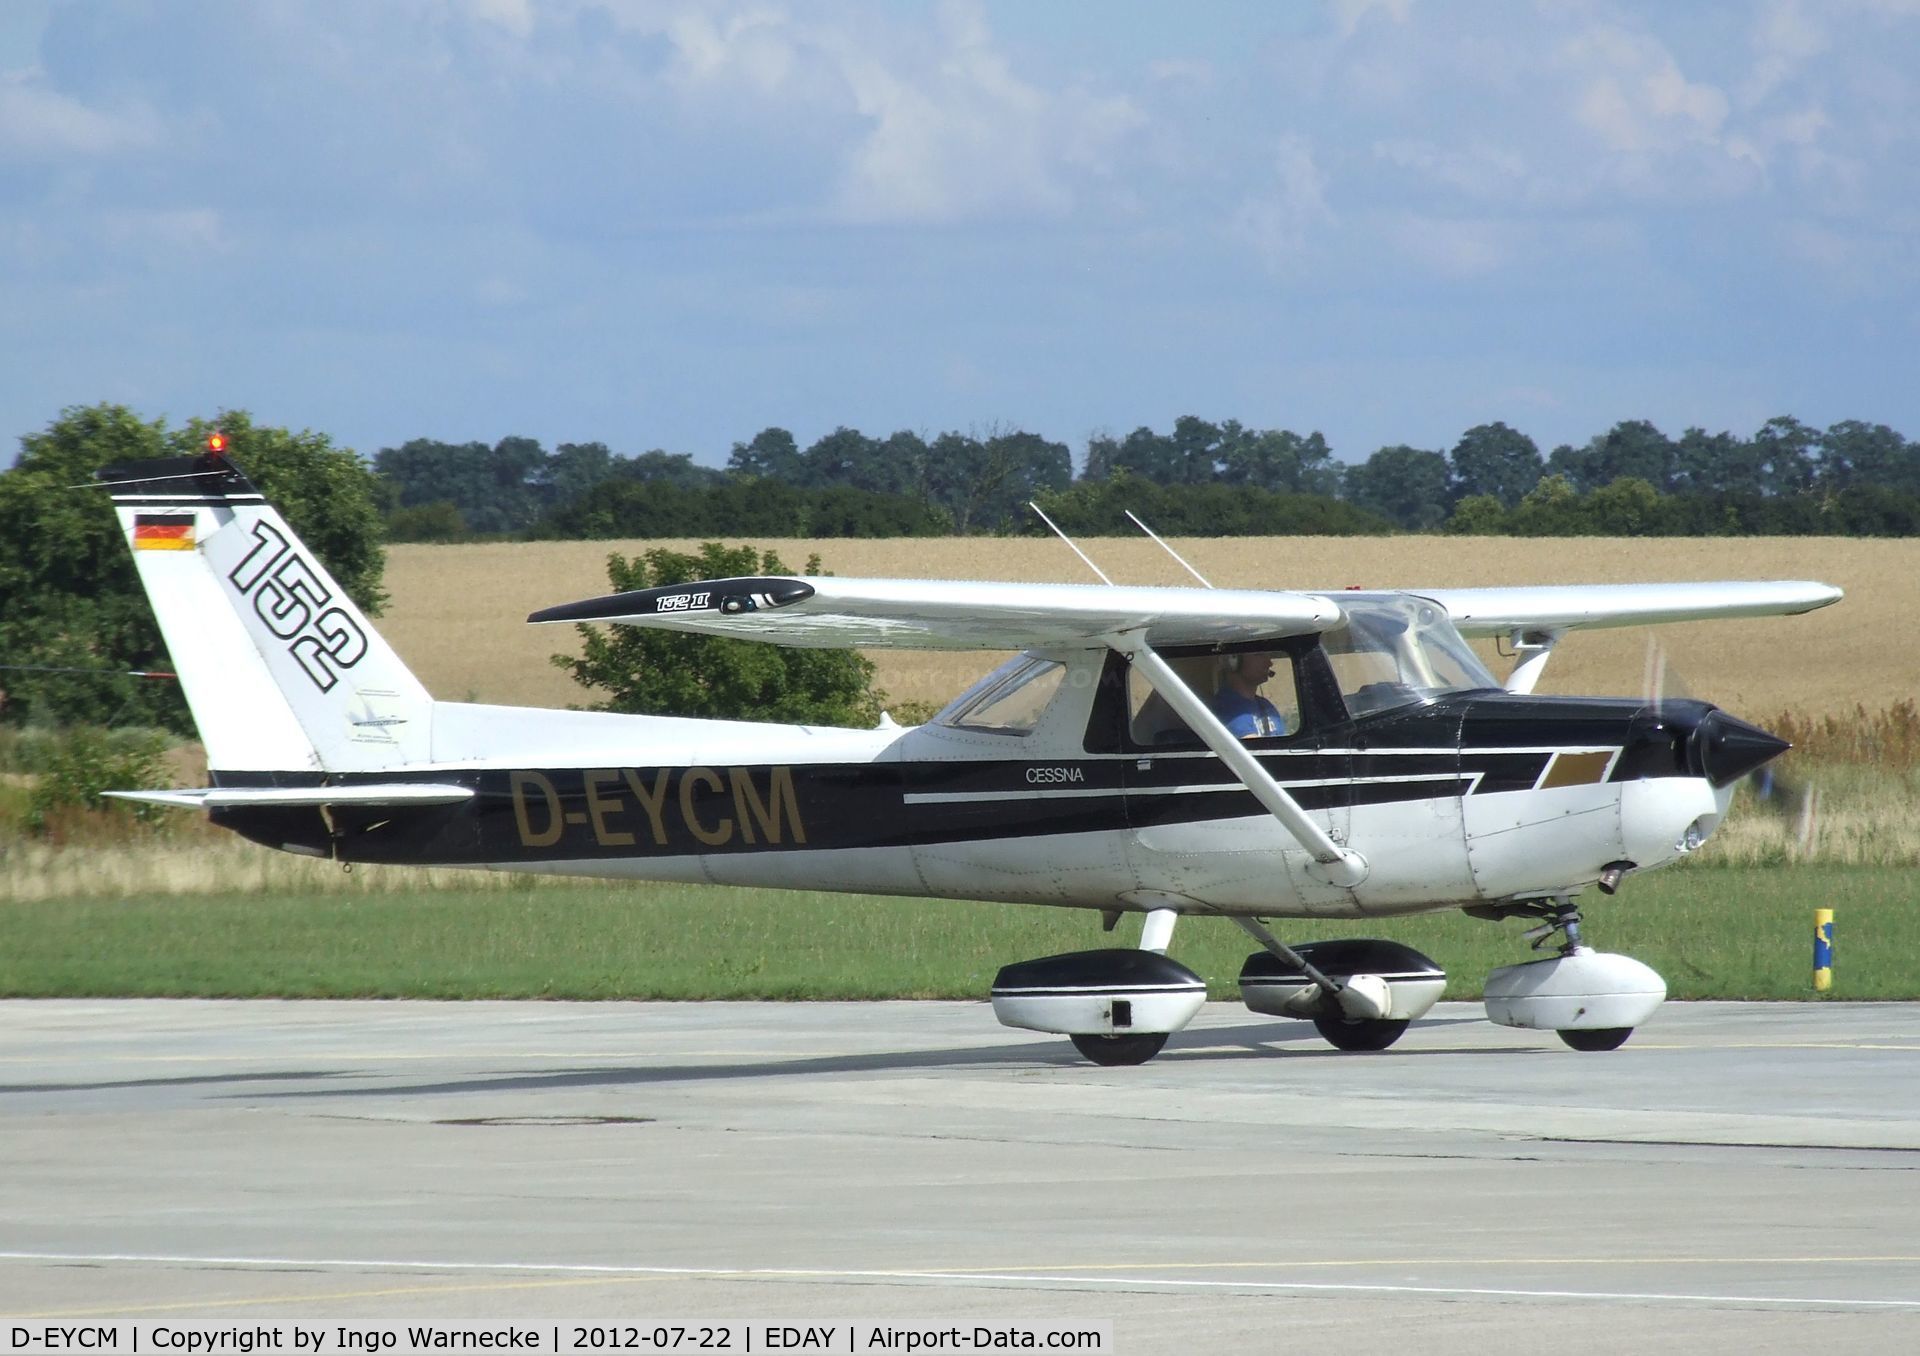 D-EYCM, Cessna 152 C/N 15280506, Cessna 152 at Strausberg airfield